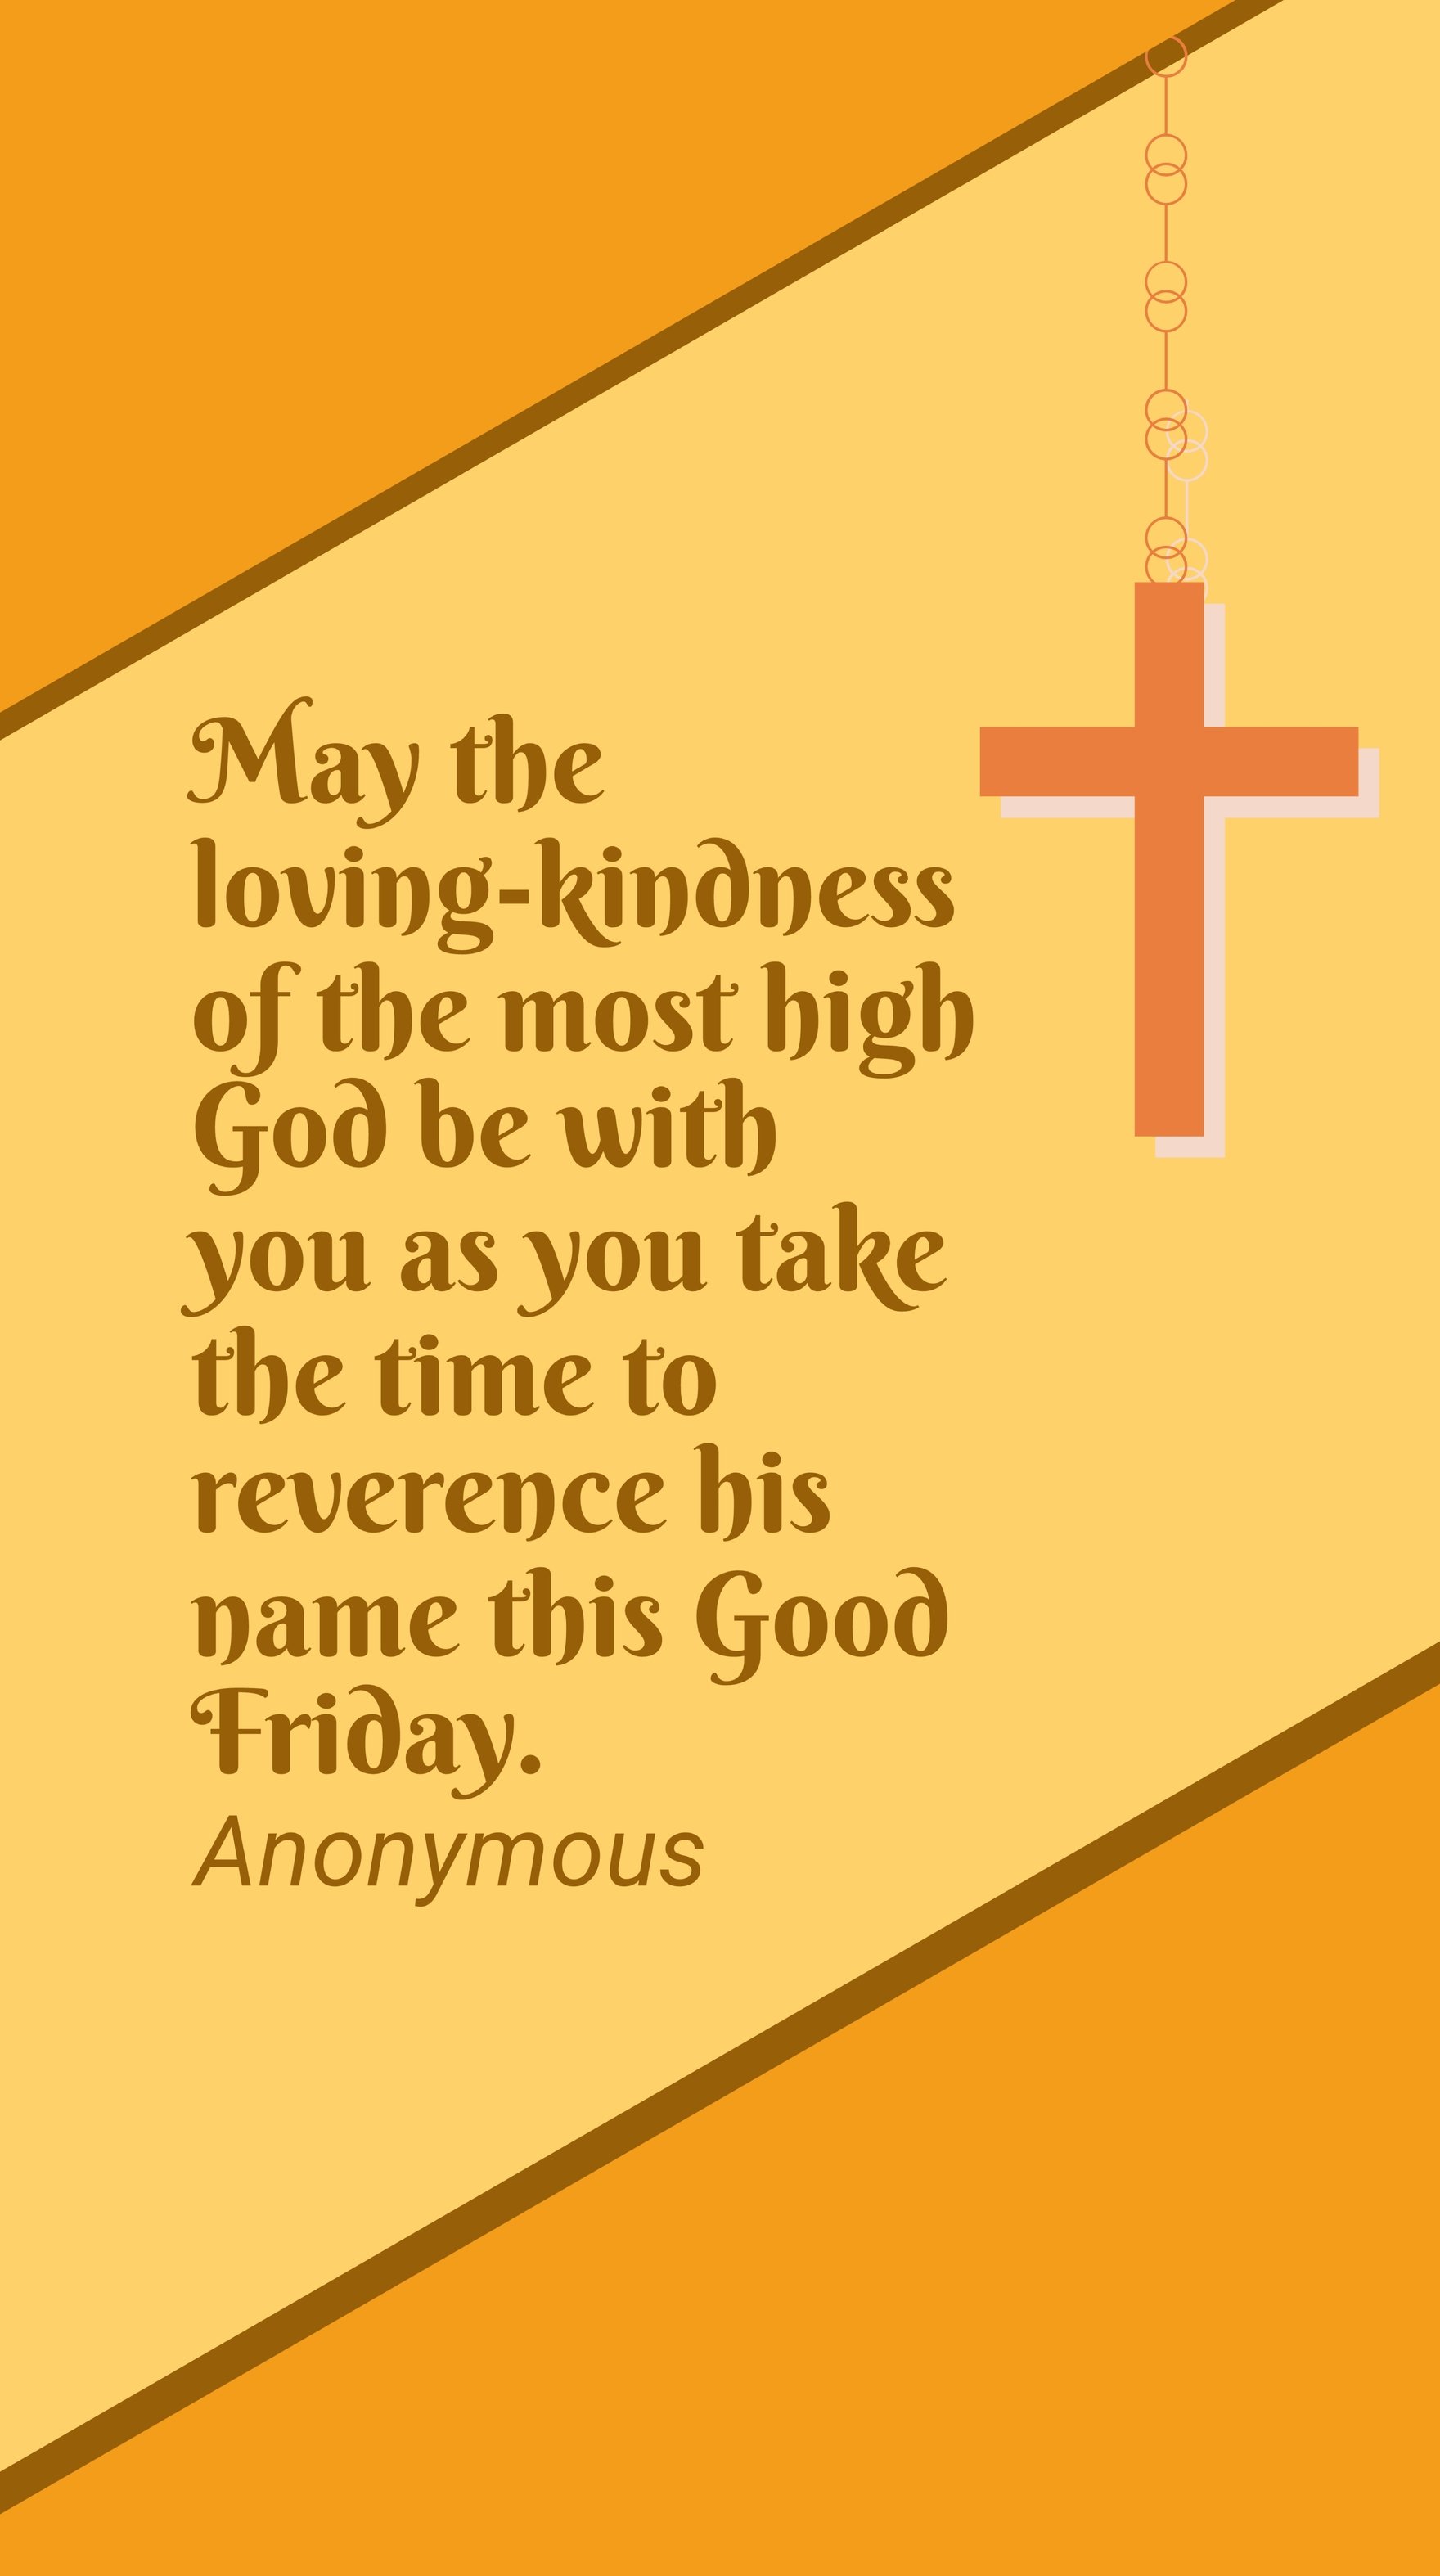 Anonymous - May the loving-kindness of the most high God be with you as you take the time to reverence his name this Good Friday.